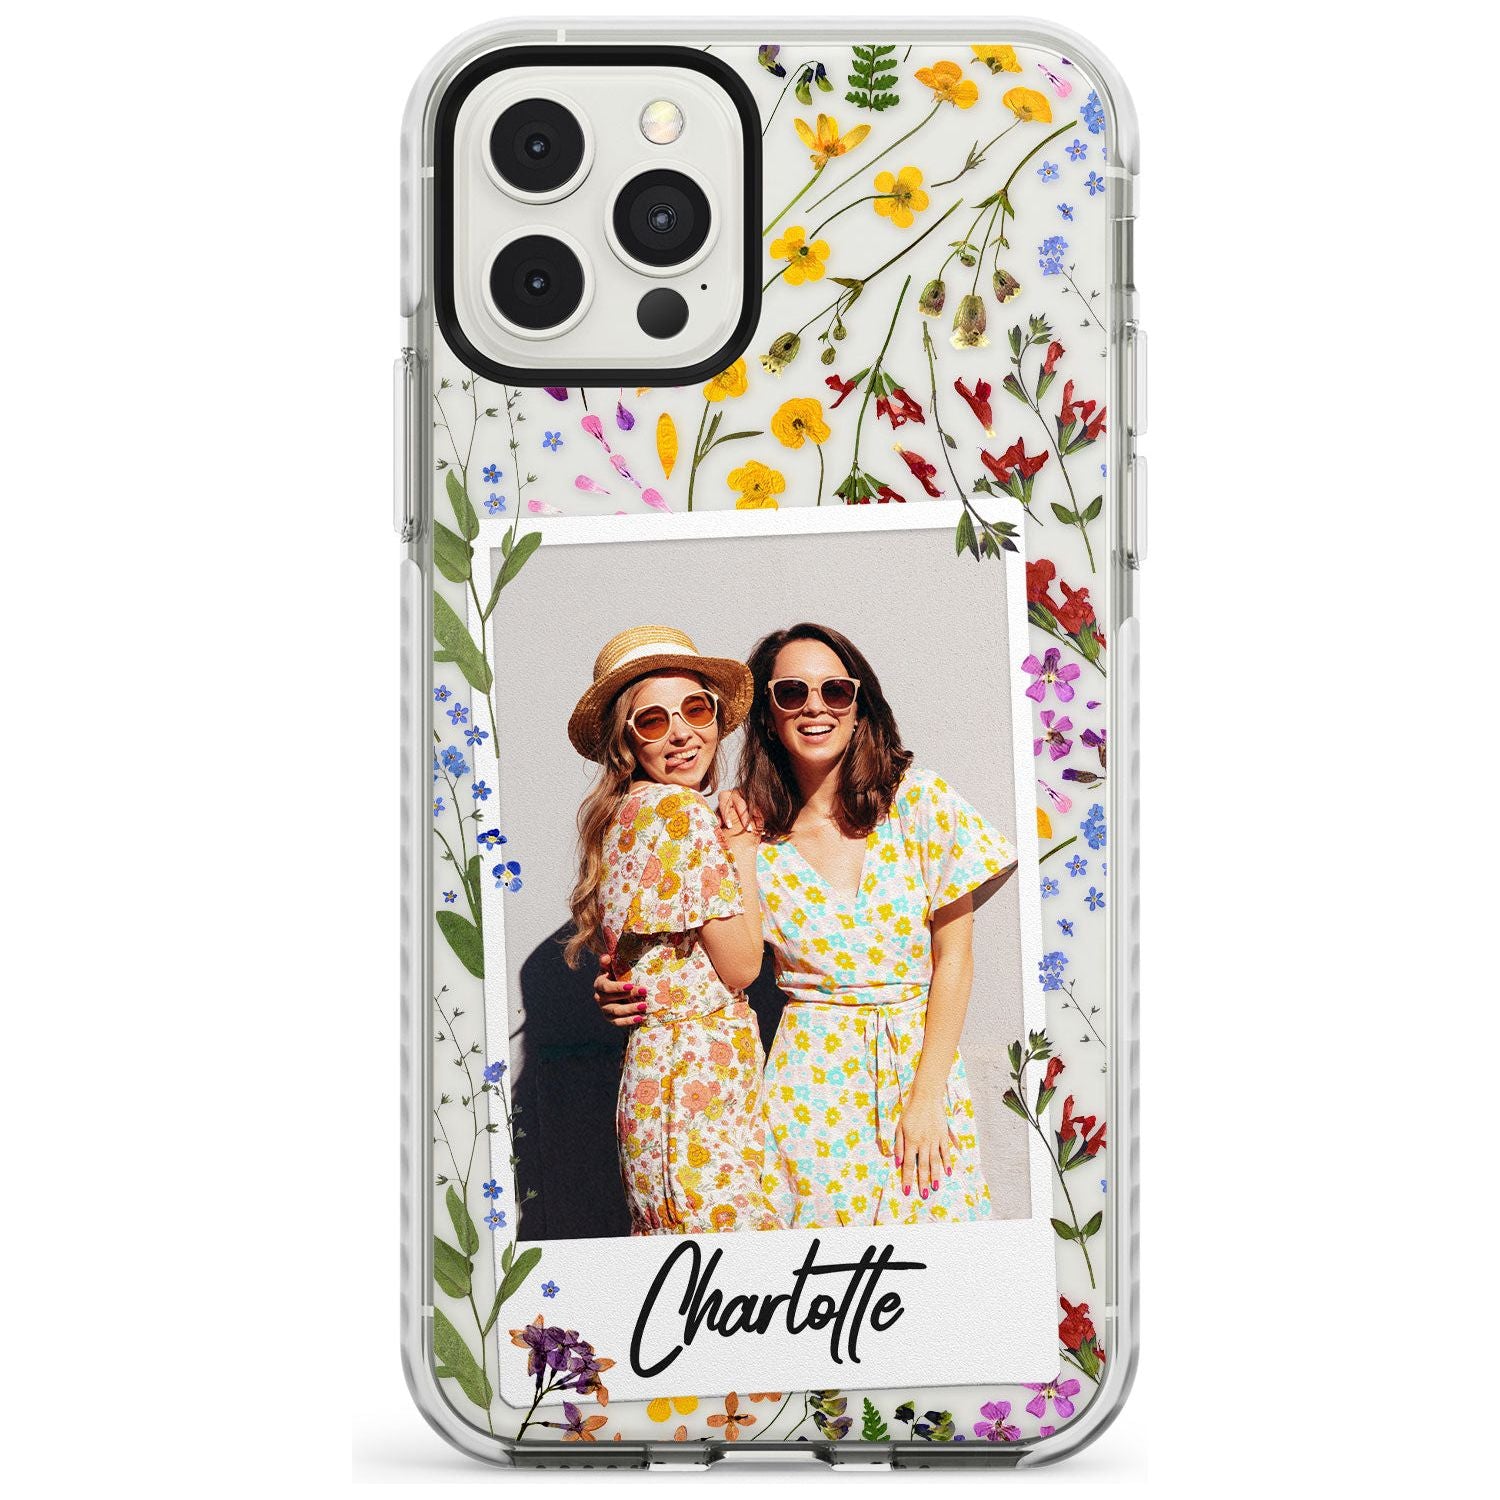 Personalised Snake Instant Photo Impact Phone Case for iPhone 11, iphone 12